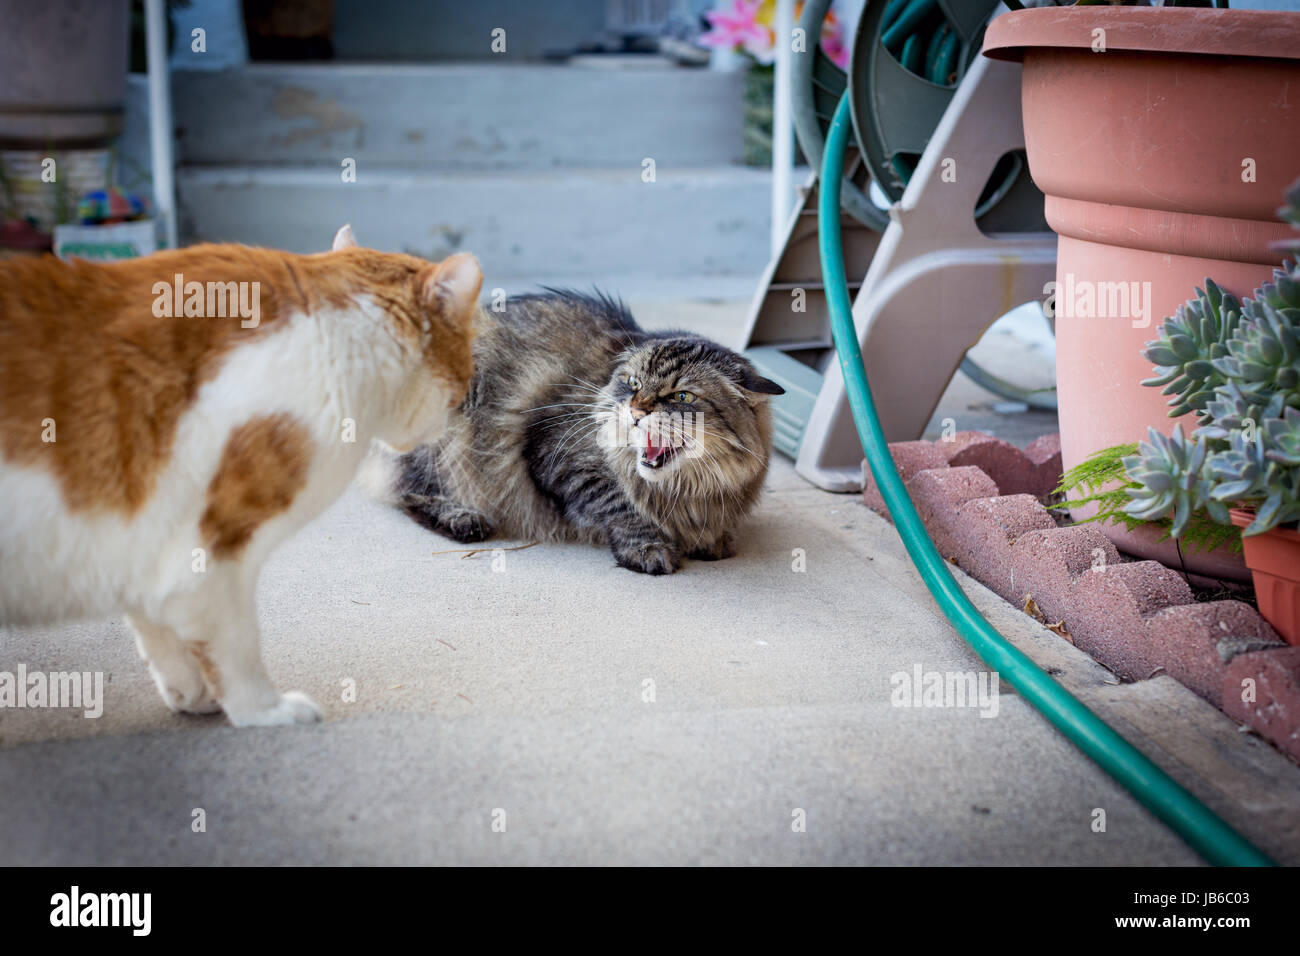 Maine Coon tabby cat hissing at and orange and white tabby cat who is standing over her. Outdoor front-yard setting. Stock Photo